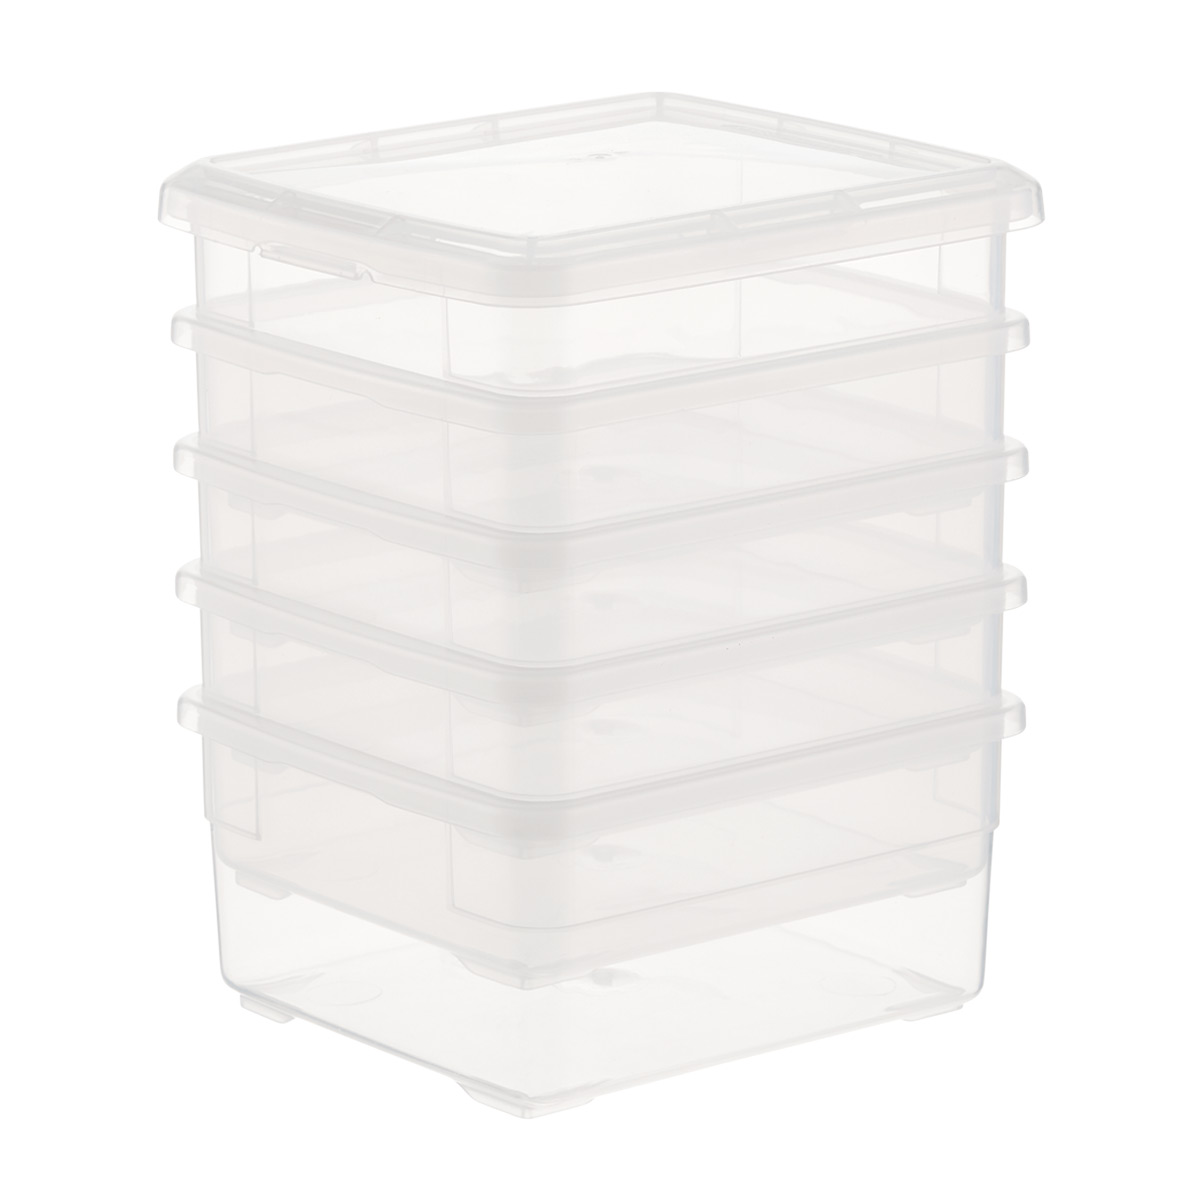 Case of 5 Our Accessory Box Clear